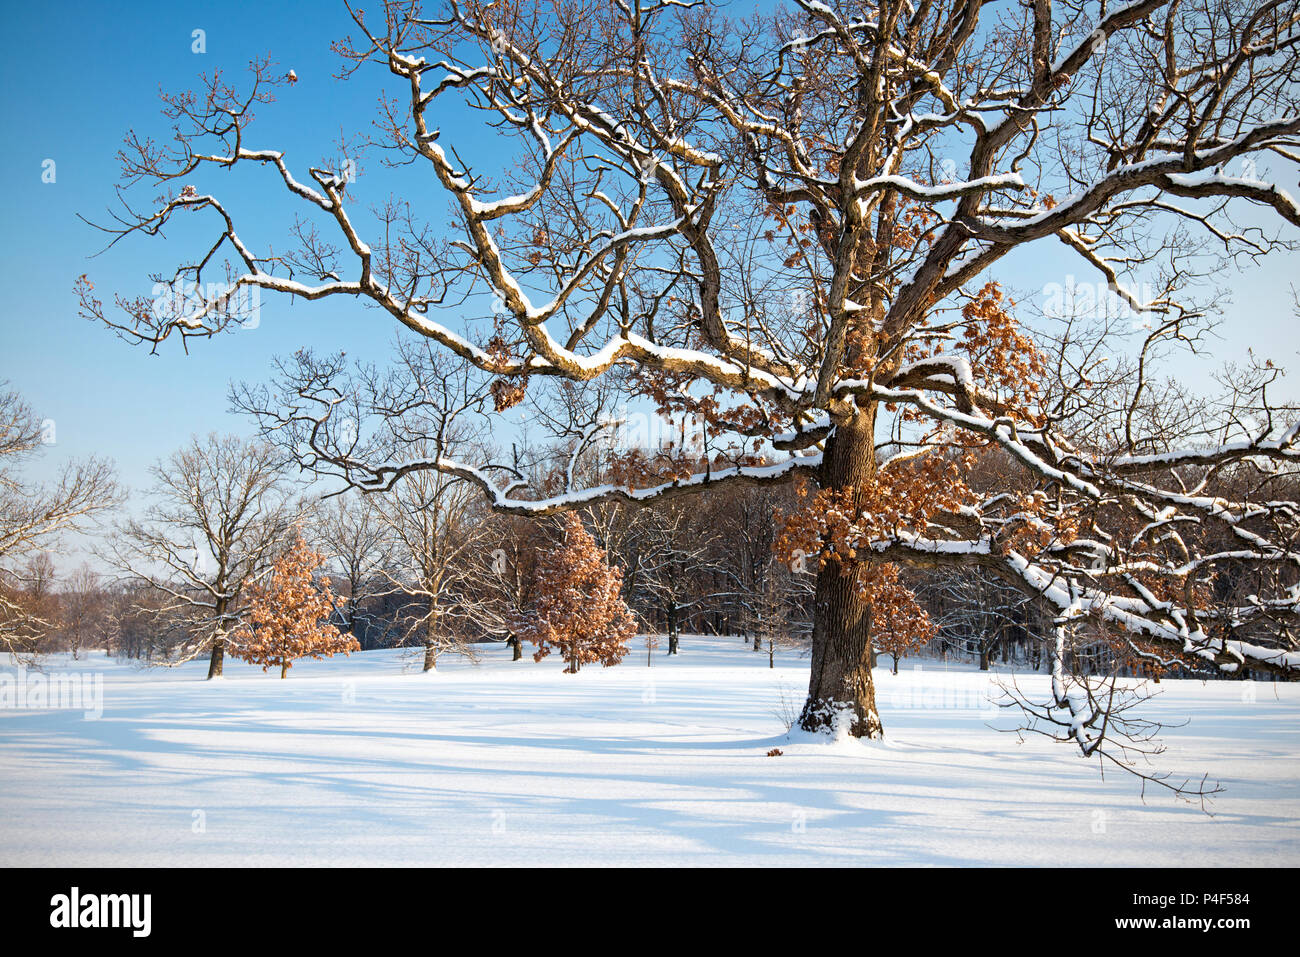 The snow-covered branches of a majestic mature oak tree spread over a winter landscape on a cold winter morning. Stock Photo